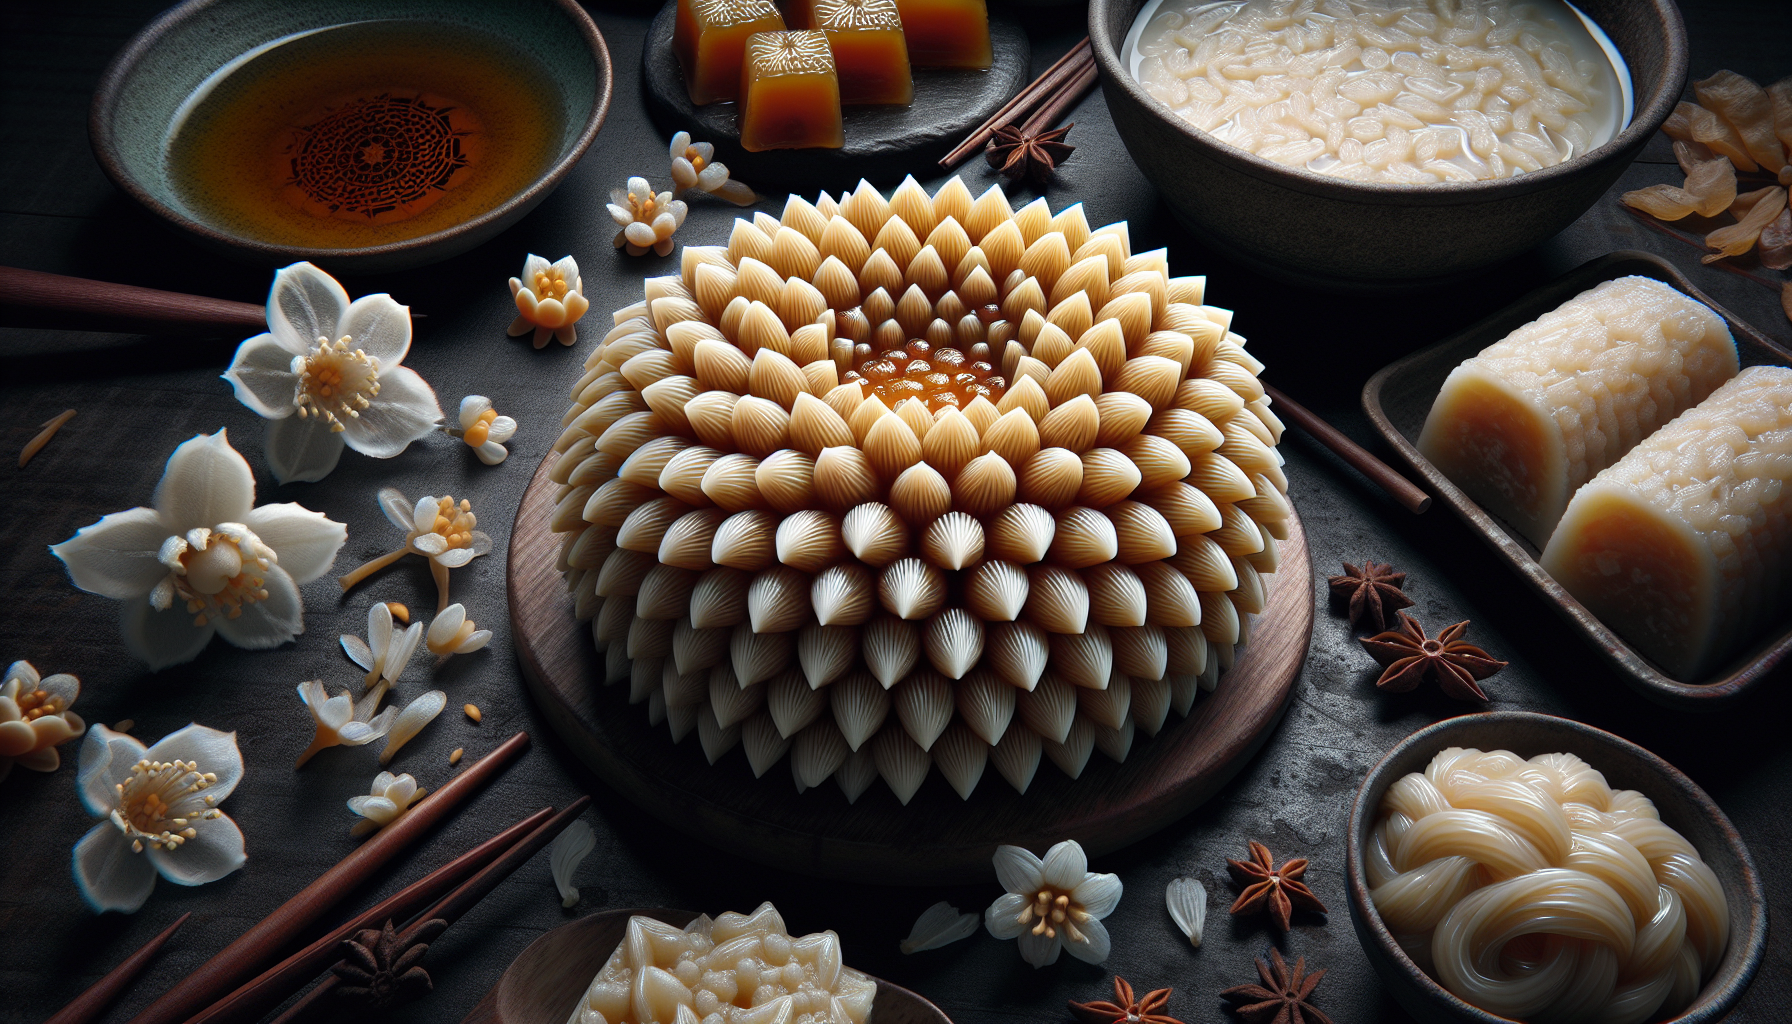 Can You Suggest A Chinese Dessert Thats Unique And Not Commonly Known?